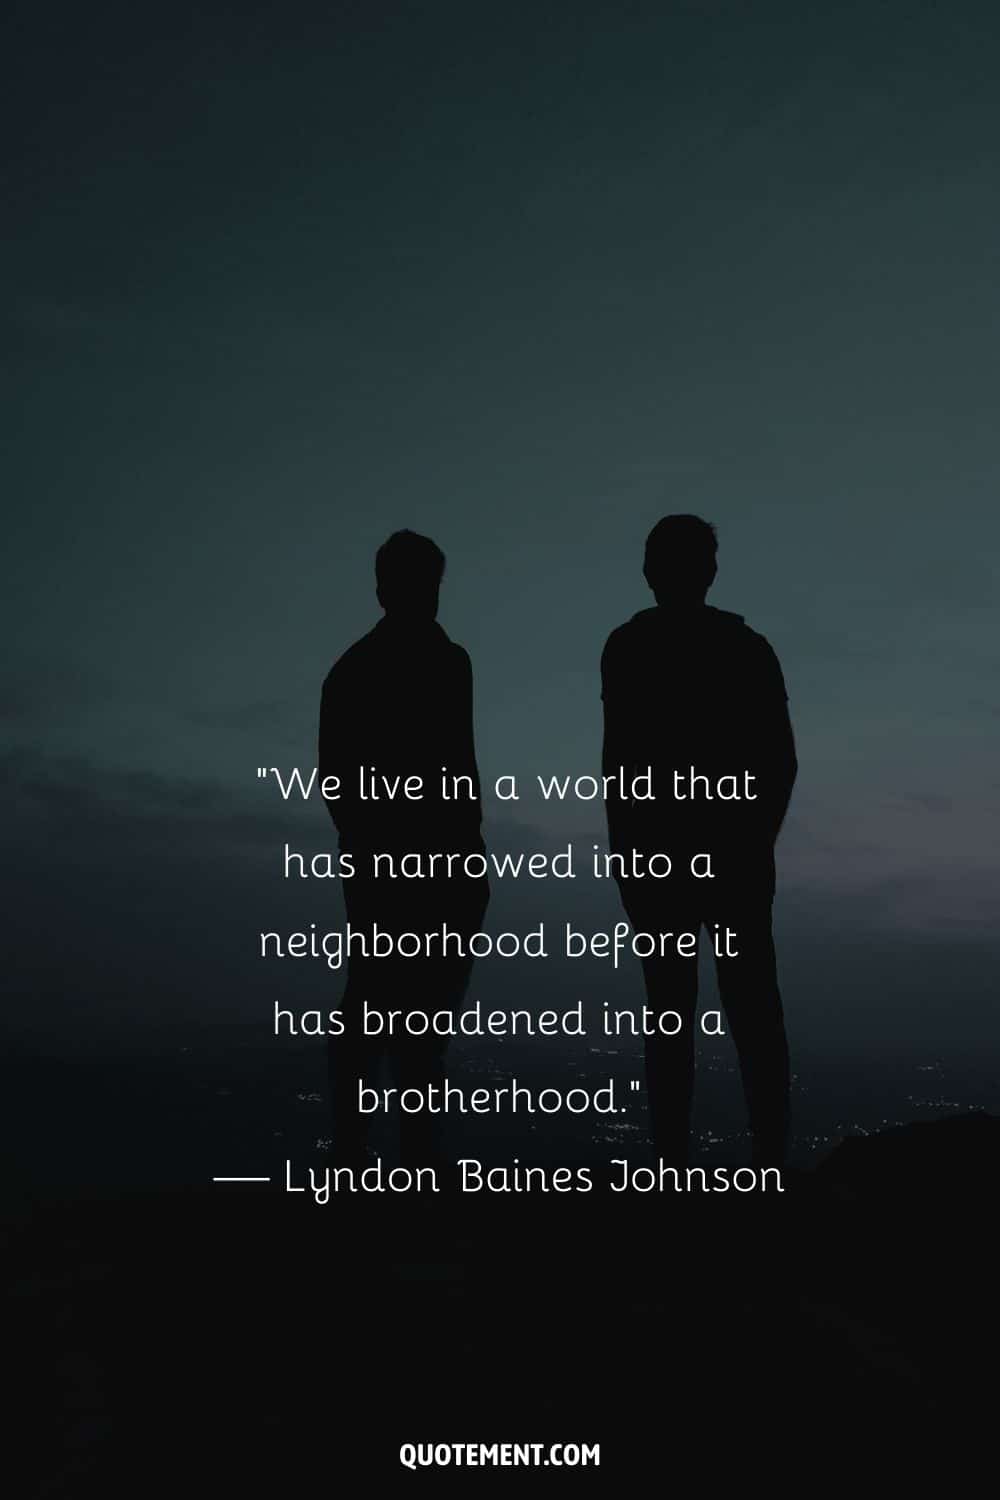 image ow two guys at night representing life quote on brotherhood